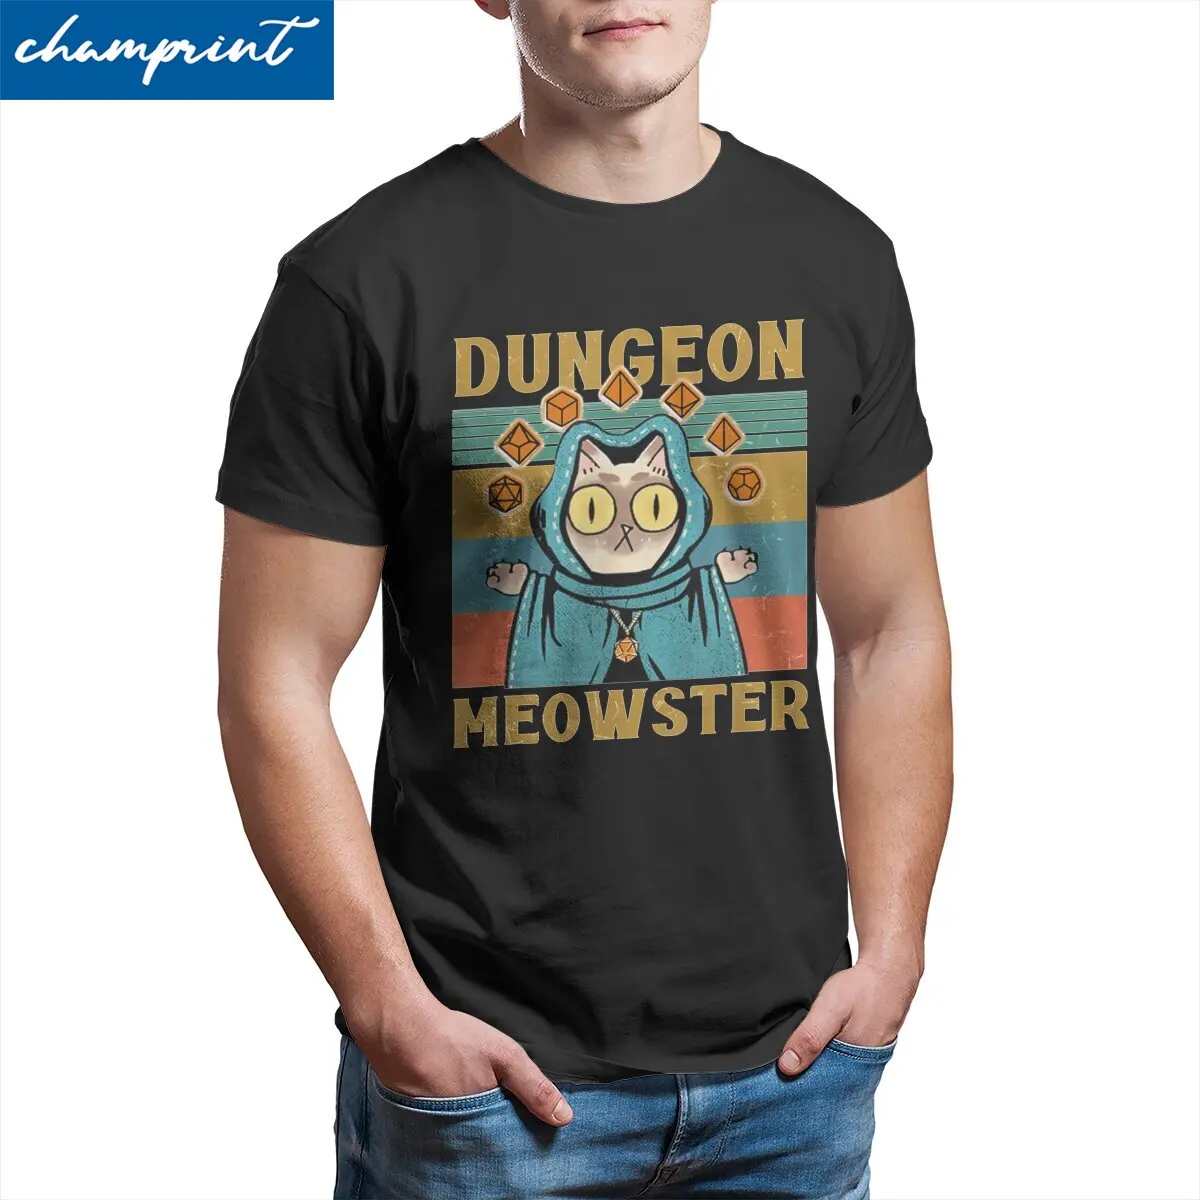 

Dungeon Meowster Nerdy Gamer Cat D20 Dice RPG Men's T Shirt Vintage Tee Shirt Round Neck T-Shirts Pure Cotton Gift Idea Clothes